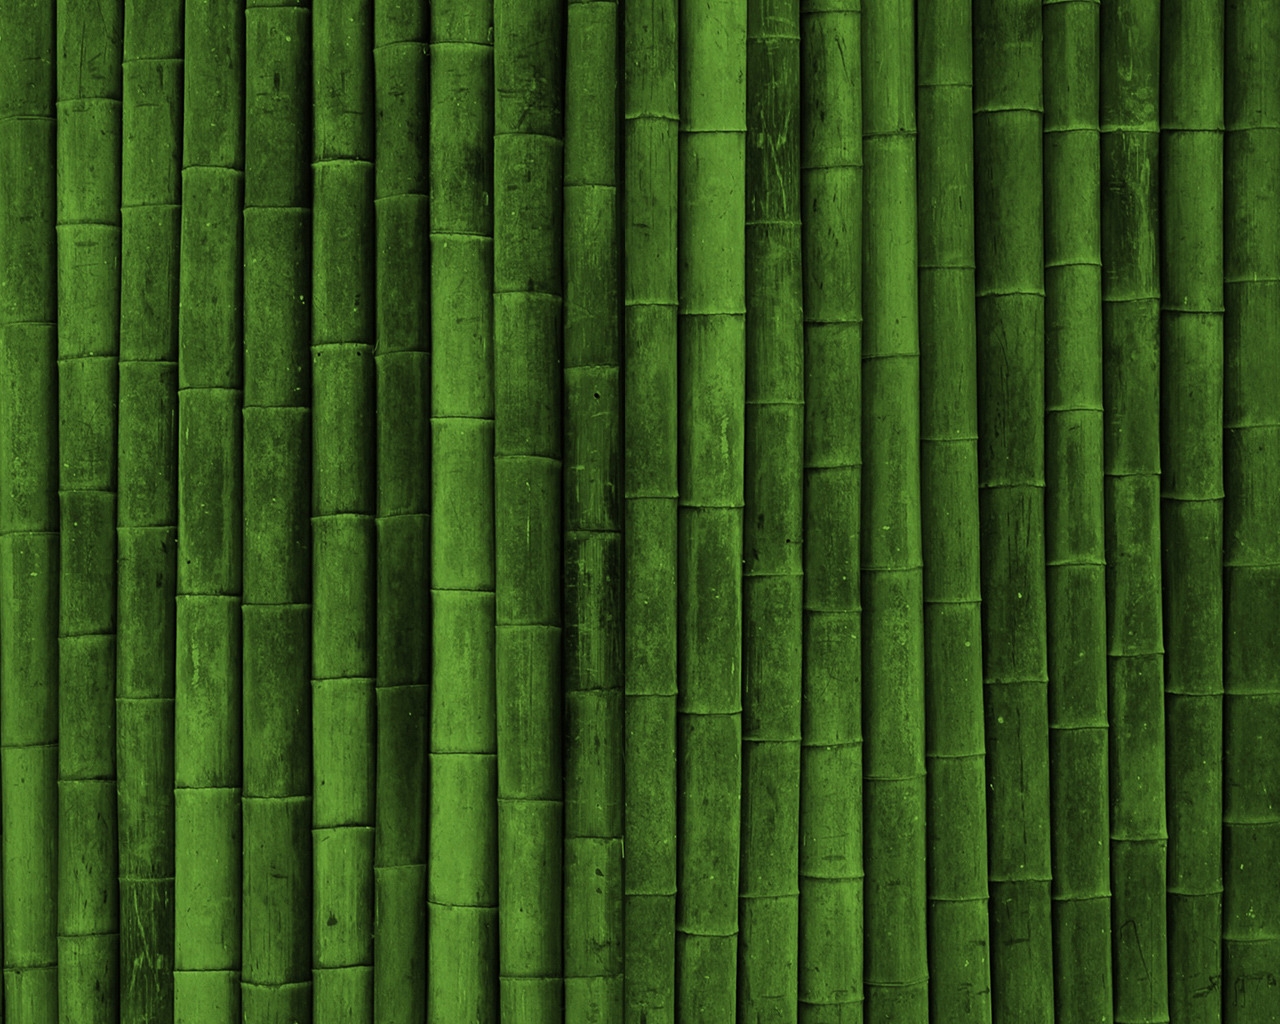 Bamboo for 1280 x 1024 resolution